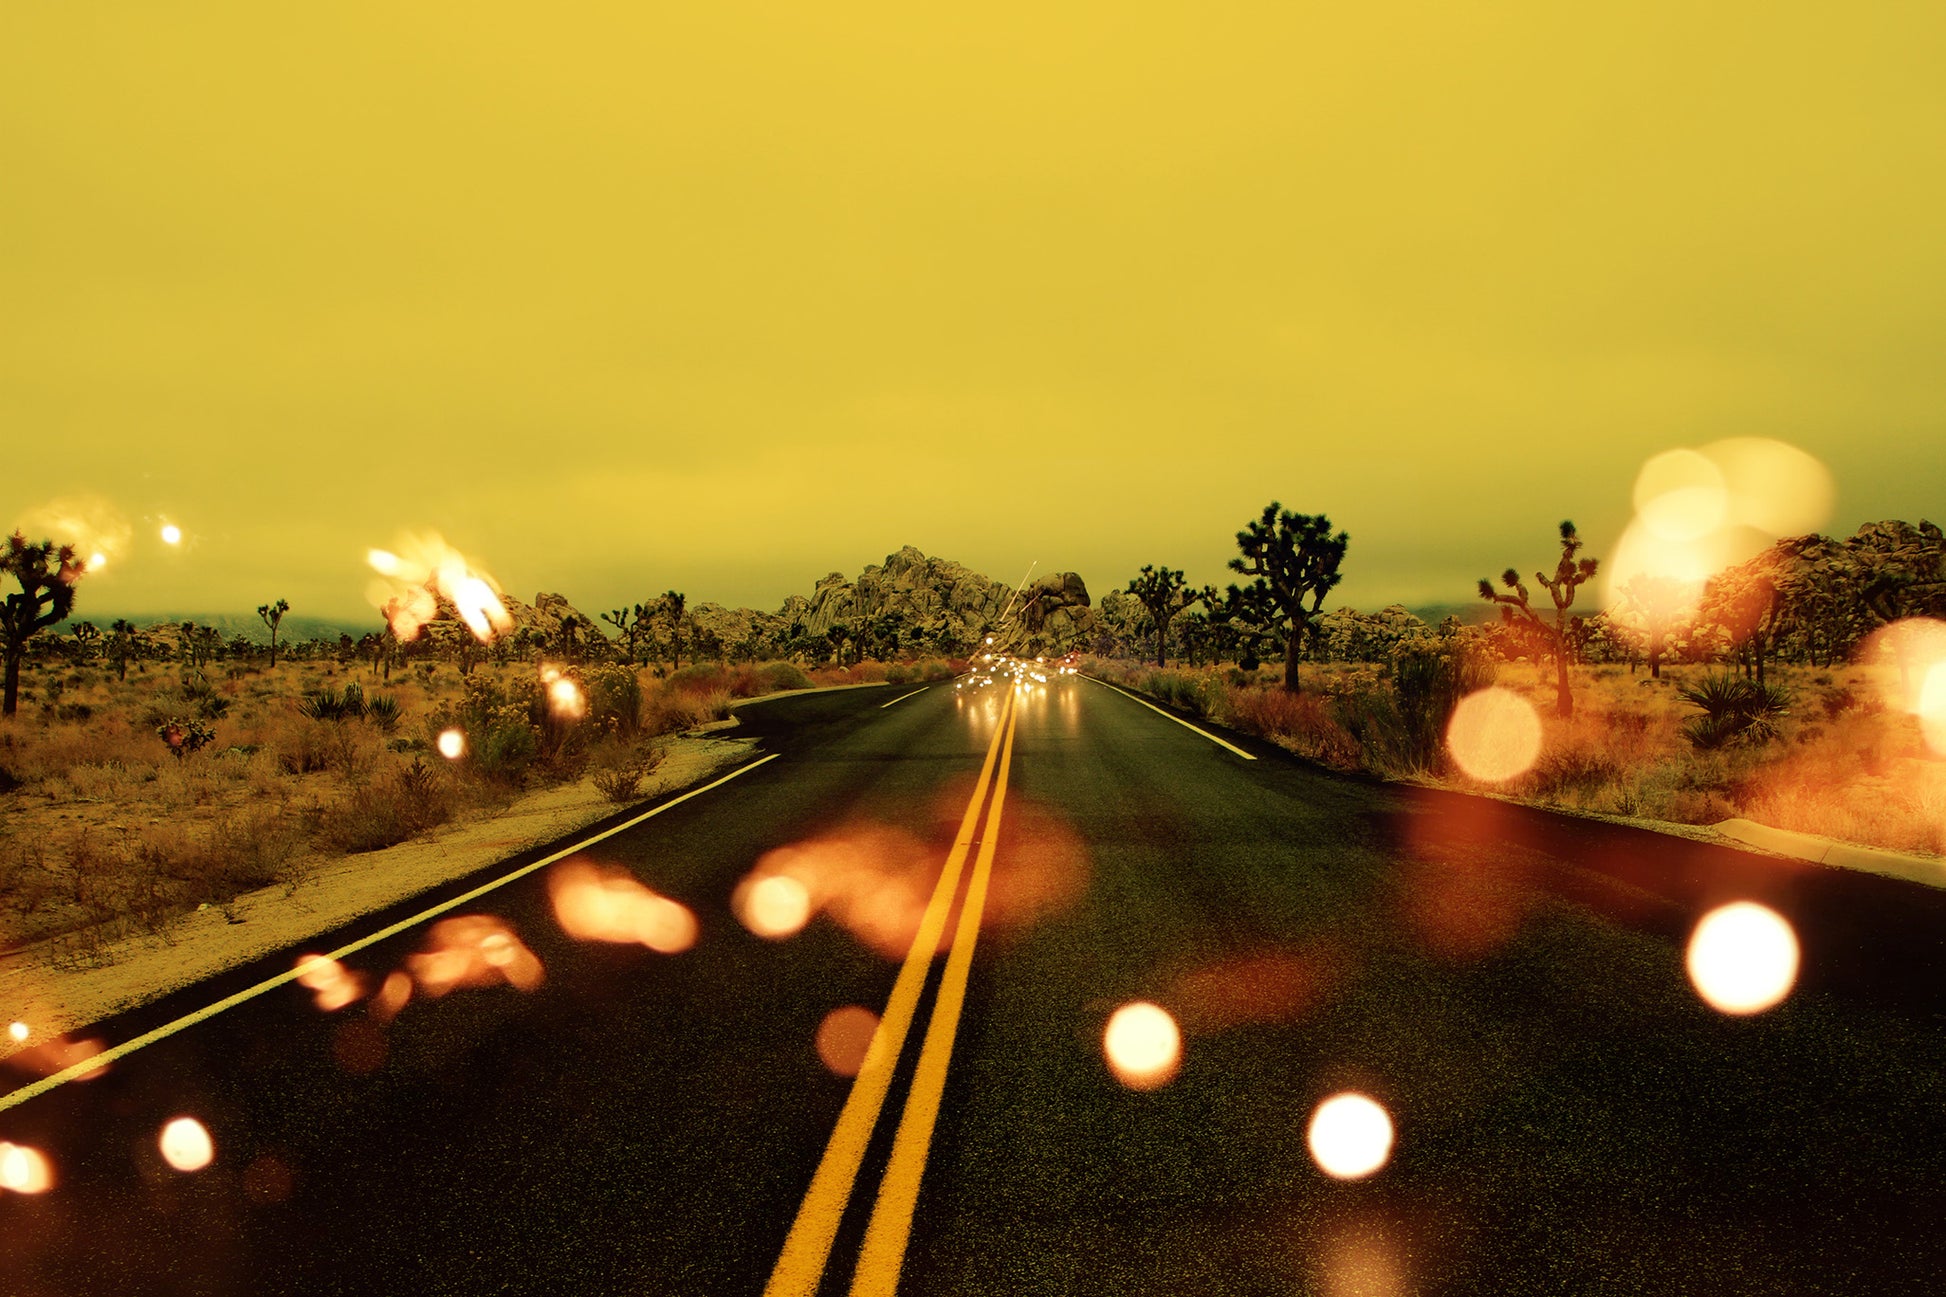 "Light Theory #6," by Shannon Black  is a fine art photograph that draws viewers into a mesmerizing world where light, solitude, and the allure of the open road converge. The road in the Joshua Tree desert stretches straight into the distance, with the vibrant yellow lines becoming the center frames of the image. Juxtaposed over the road, sparks of light add a dynamic and magical element to the s